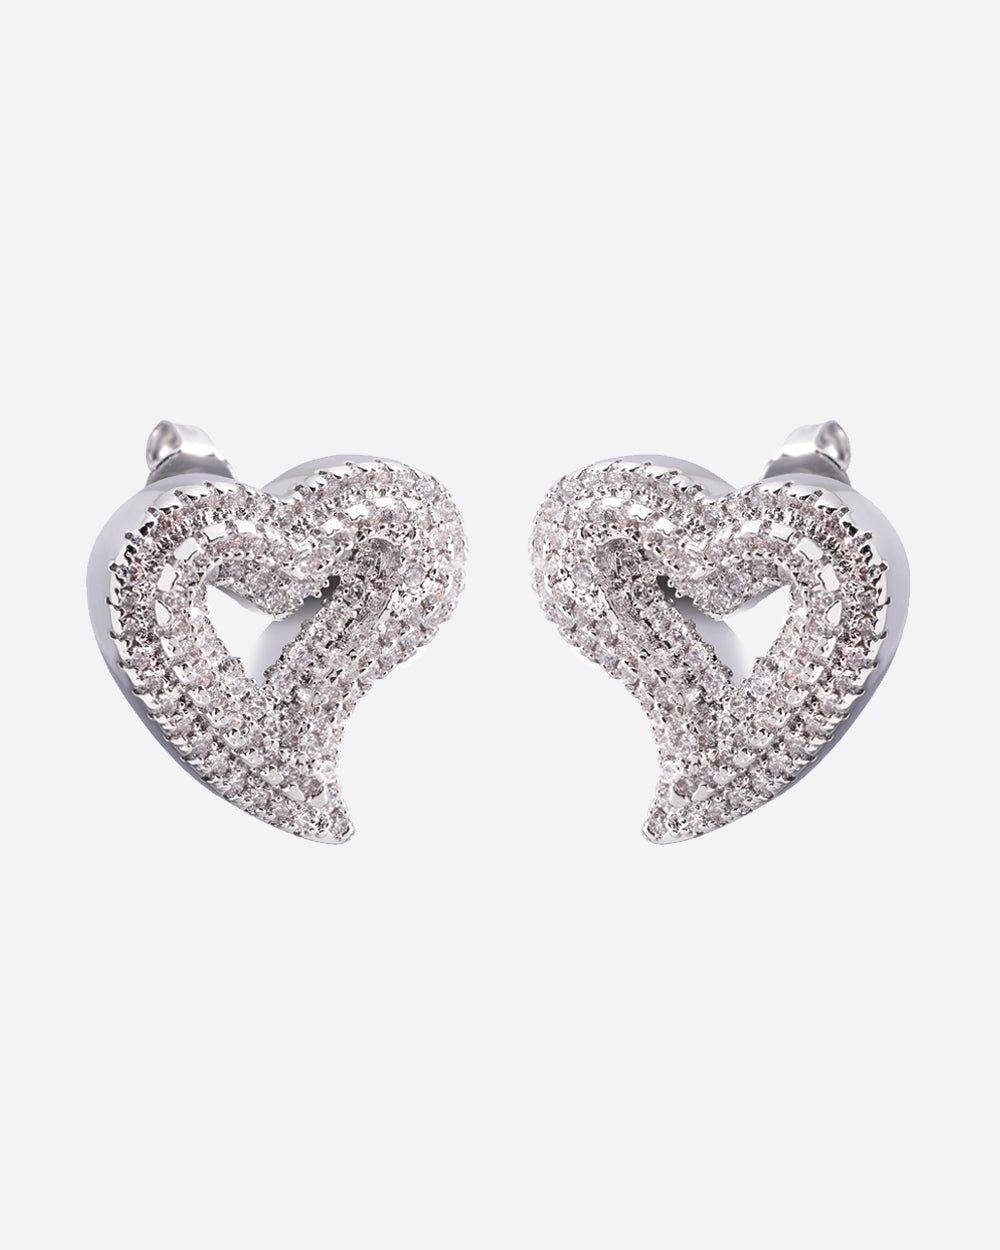 PAVED HEARTS STUDS. - WHITE GOLD - DRIP IN THE JEWEL